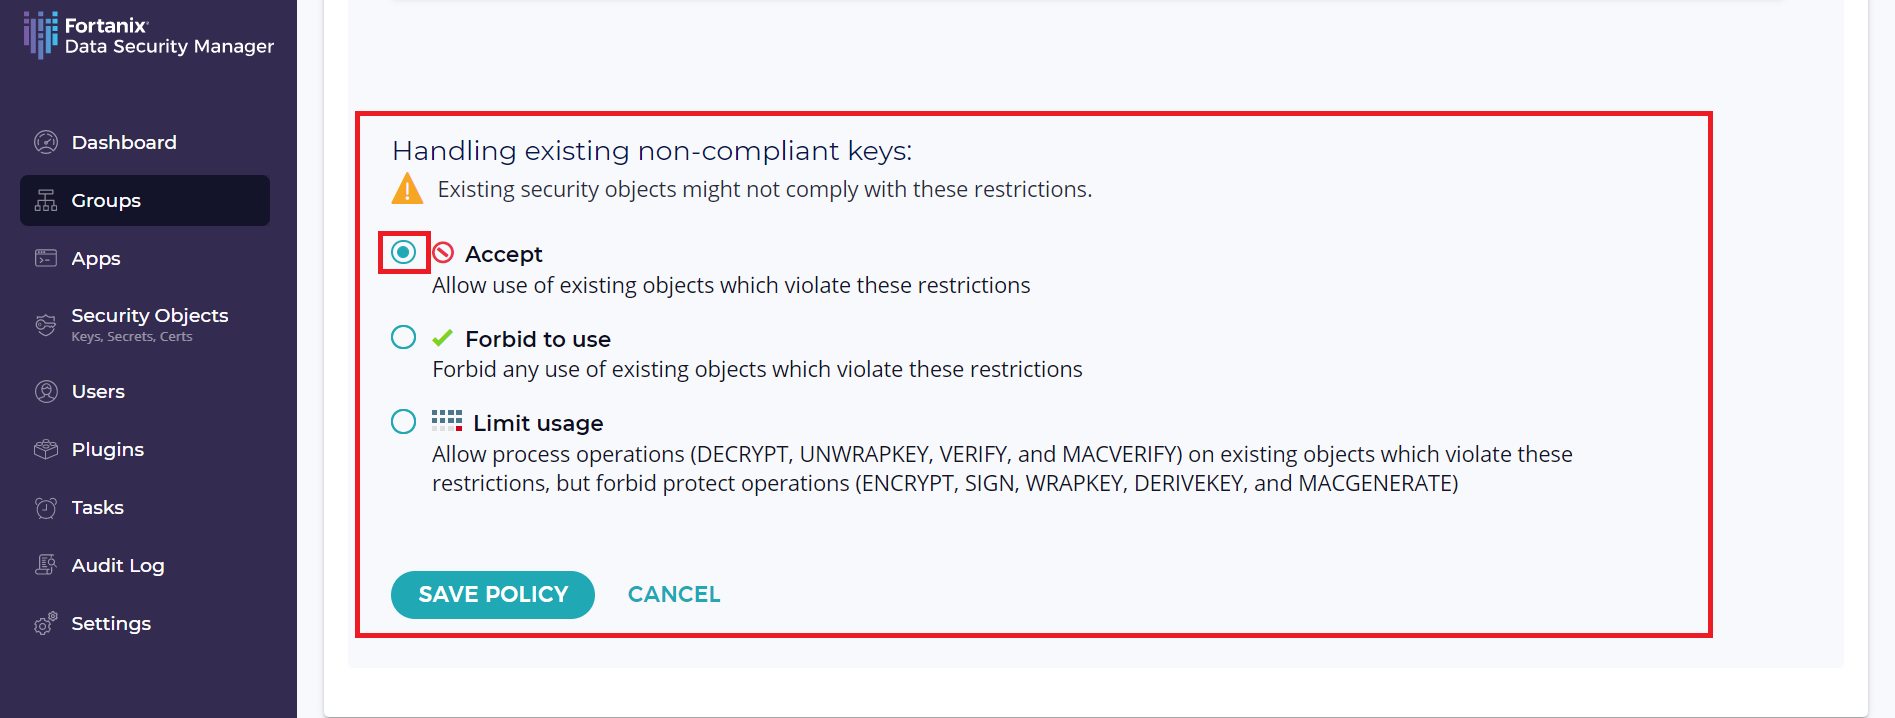 Handling_existing_non_compliant_keys.png